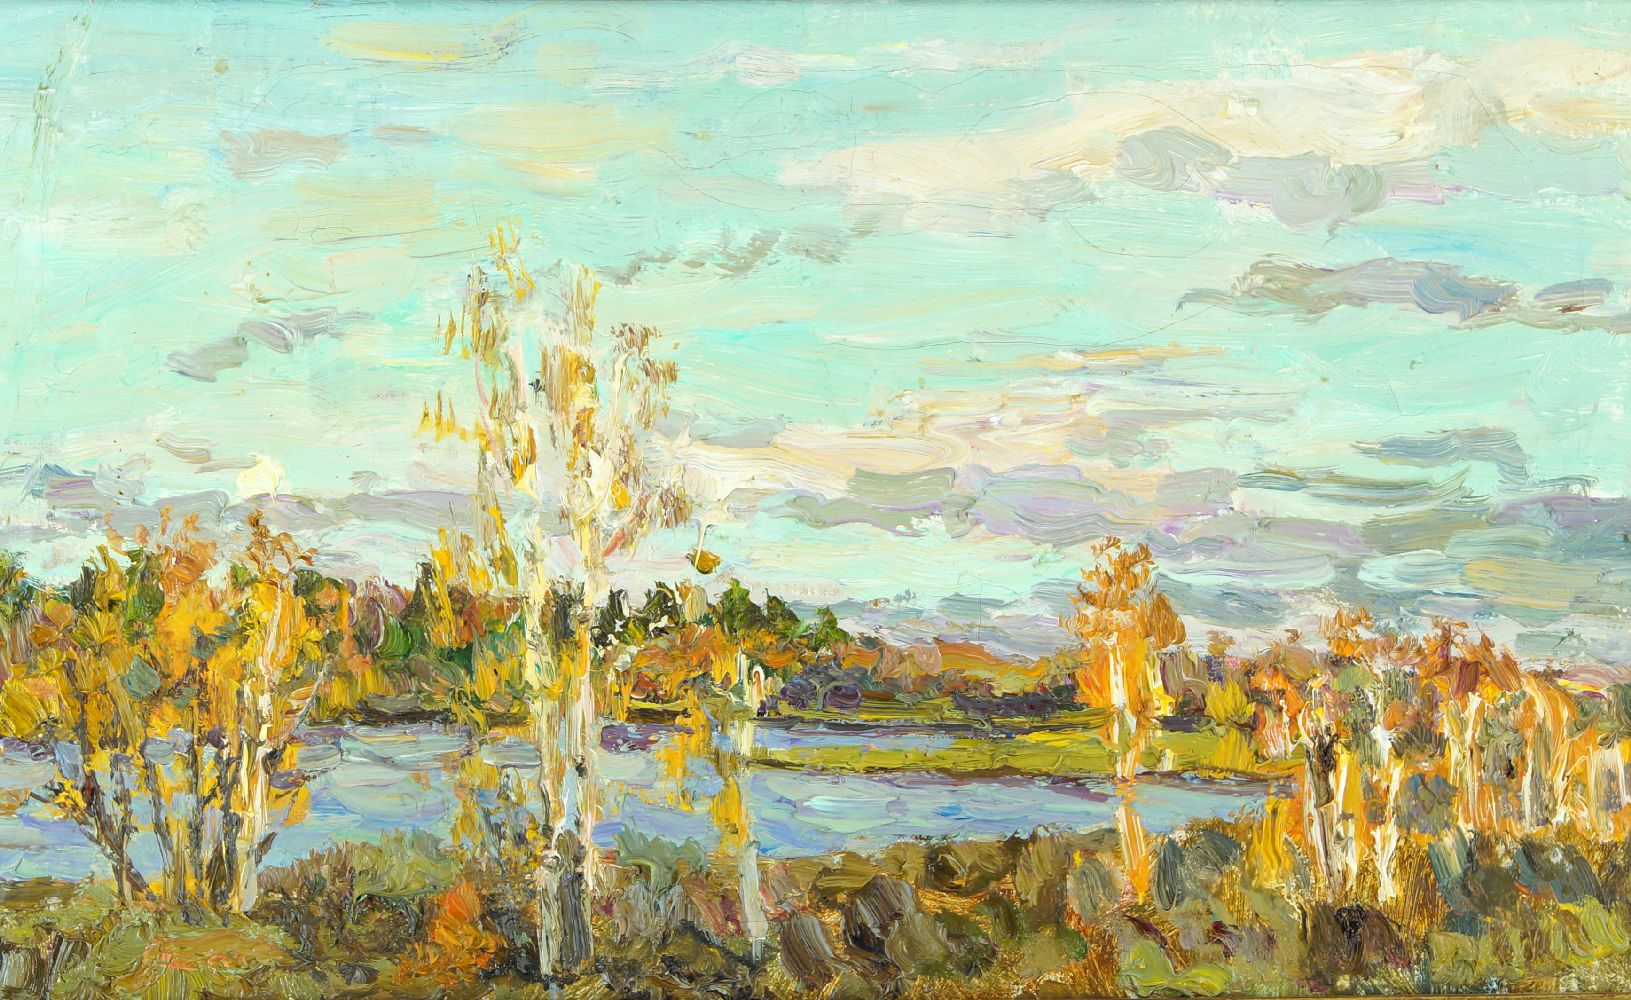 Elena Burkova, Russian, b.1960- Autumn landscape with birch trees and clouds; oil on canvas, 23x37.